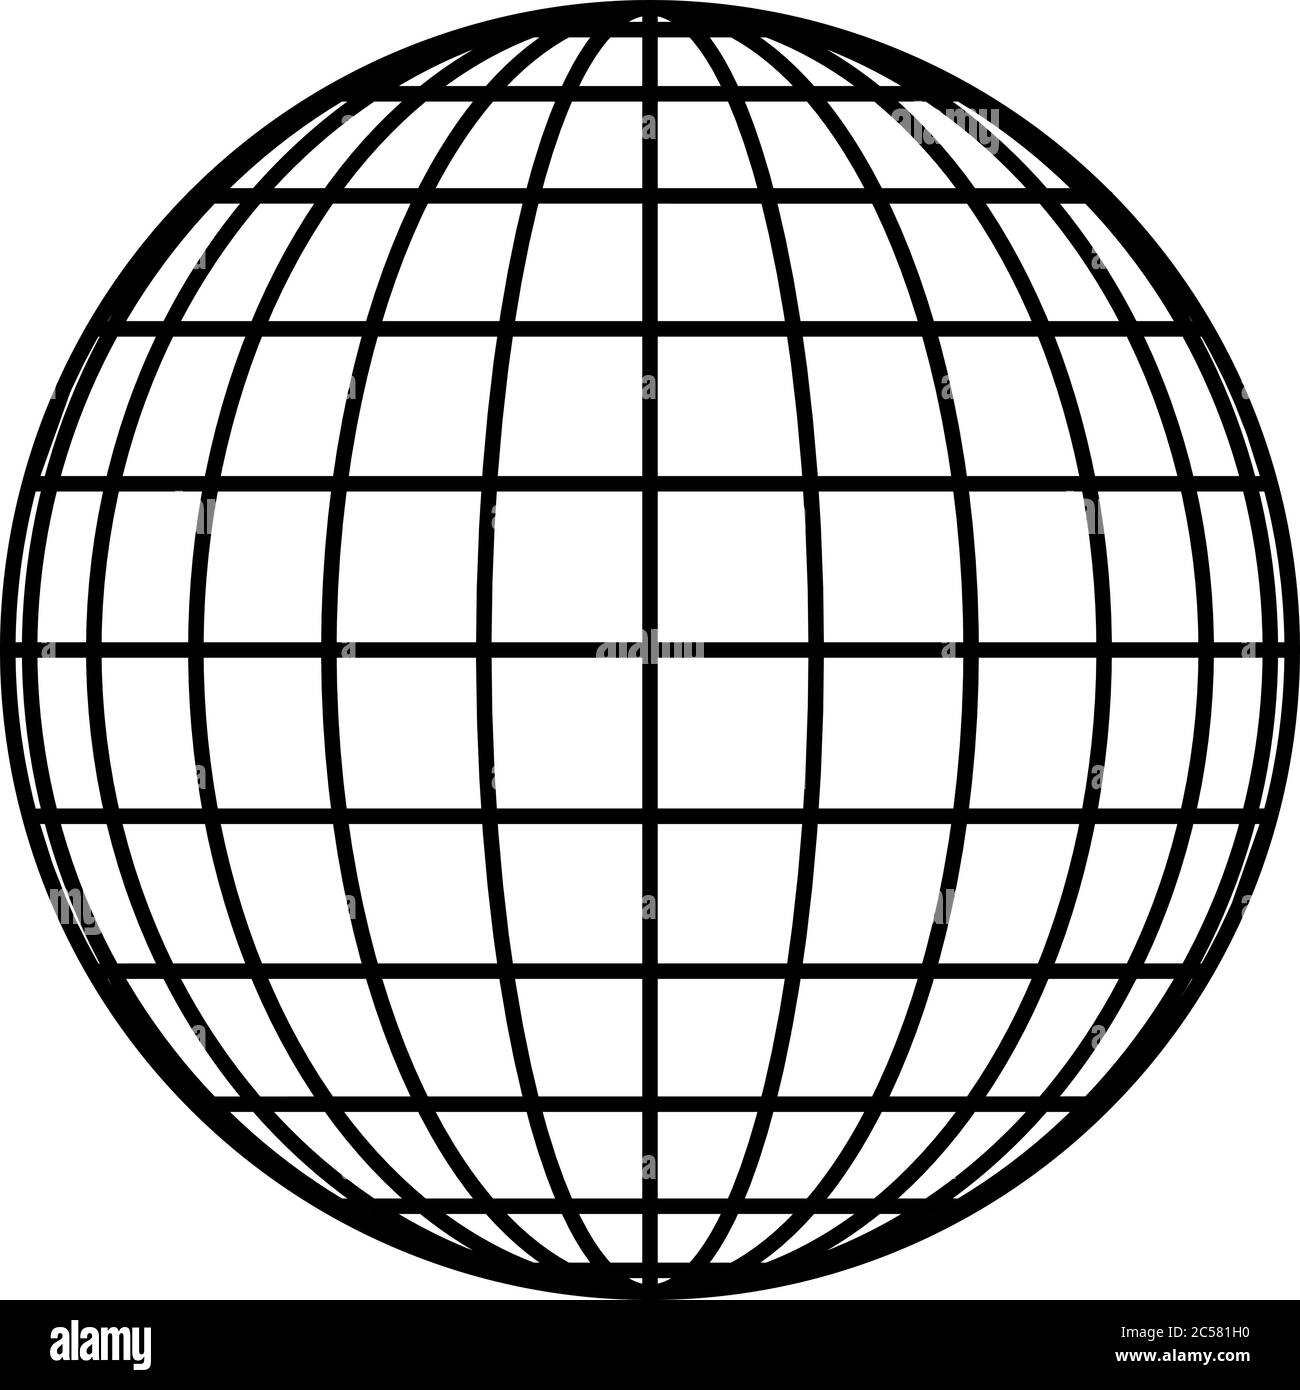 earth clipart black and white longitude